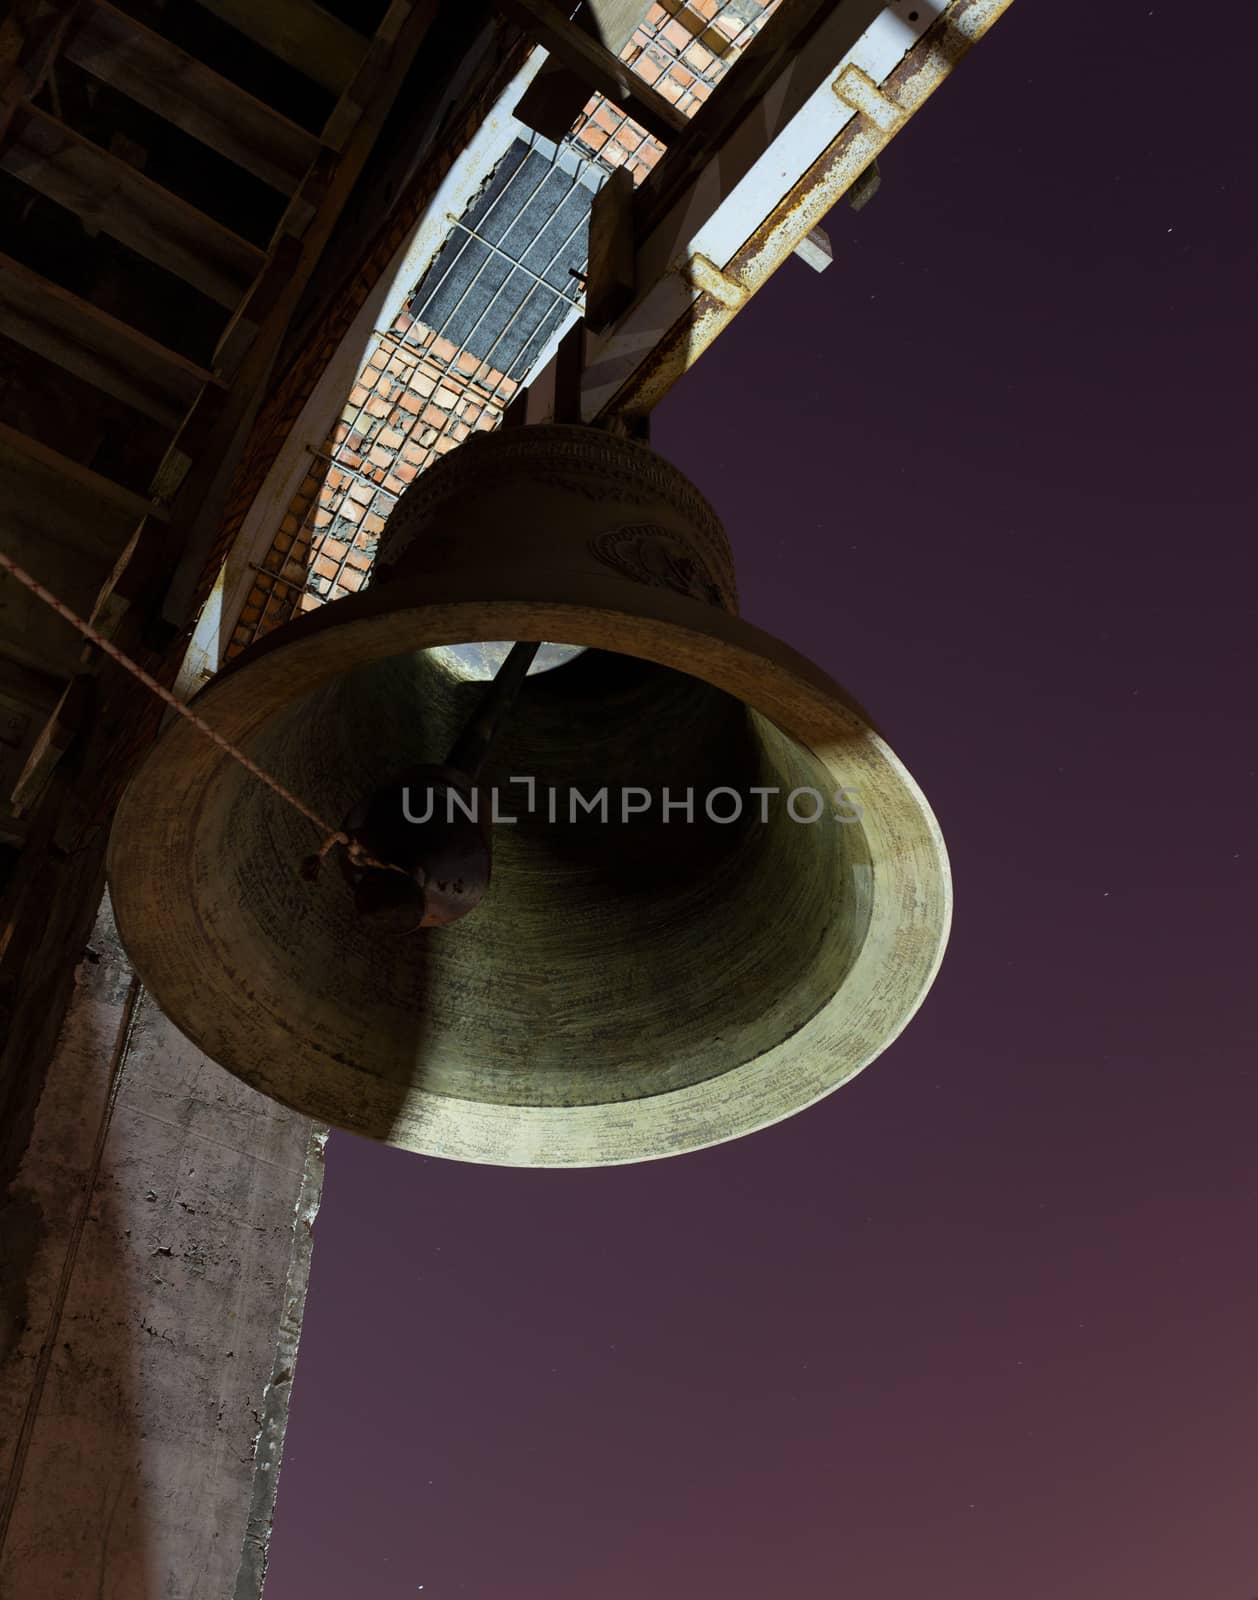 Night view at the full moon of the bells at the Cathedrals’ belfry in Penza, Russia